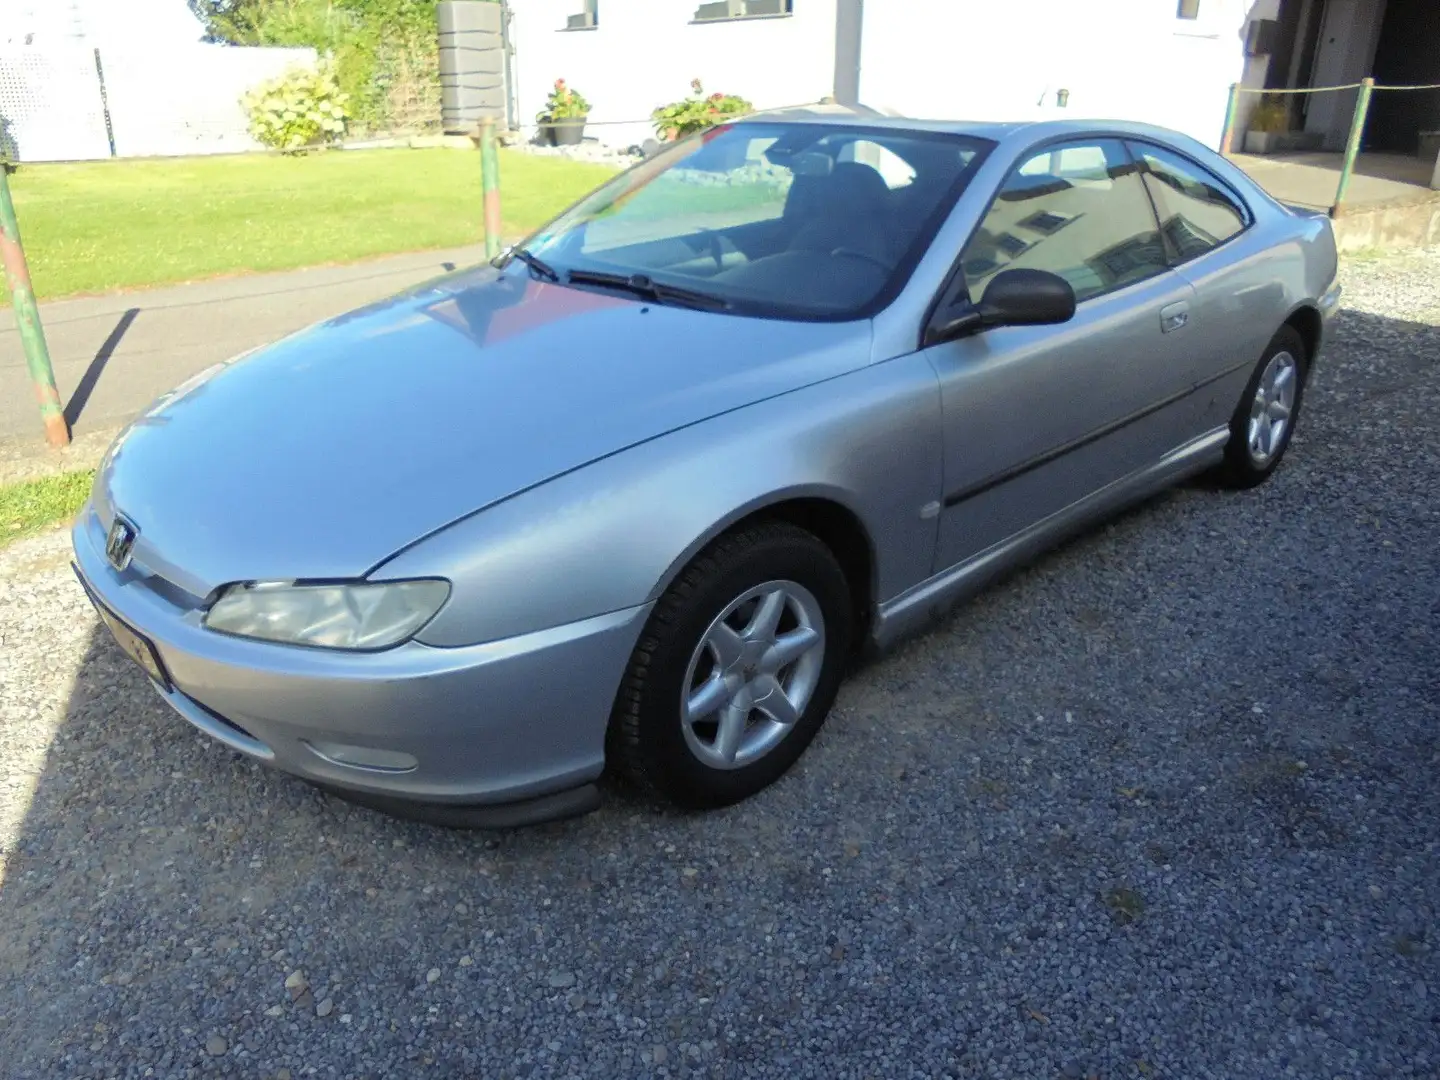 Peugeot 406 Coupe=1HAND= Silber - 2